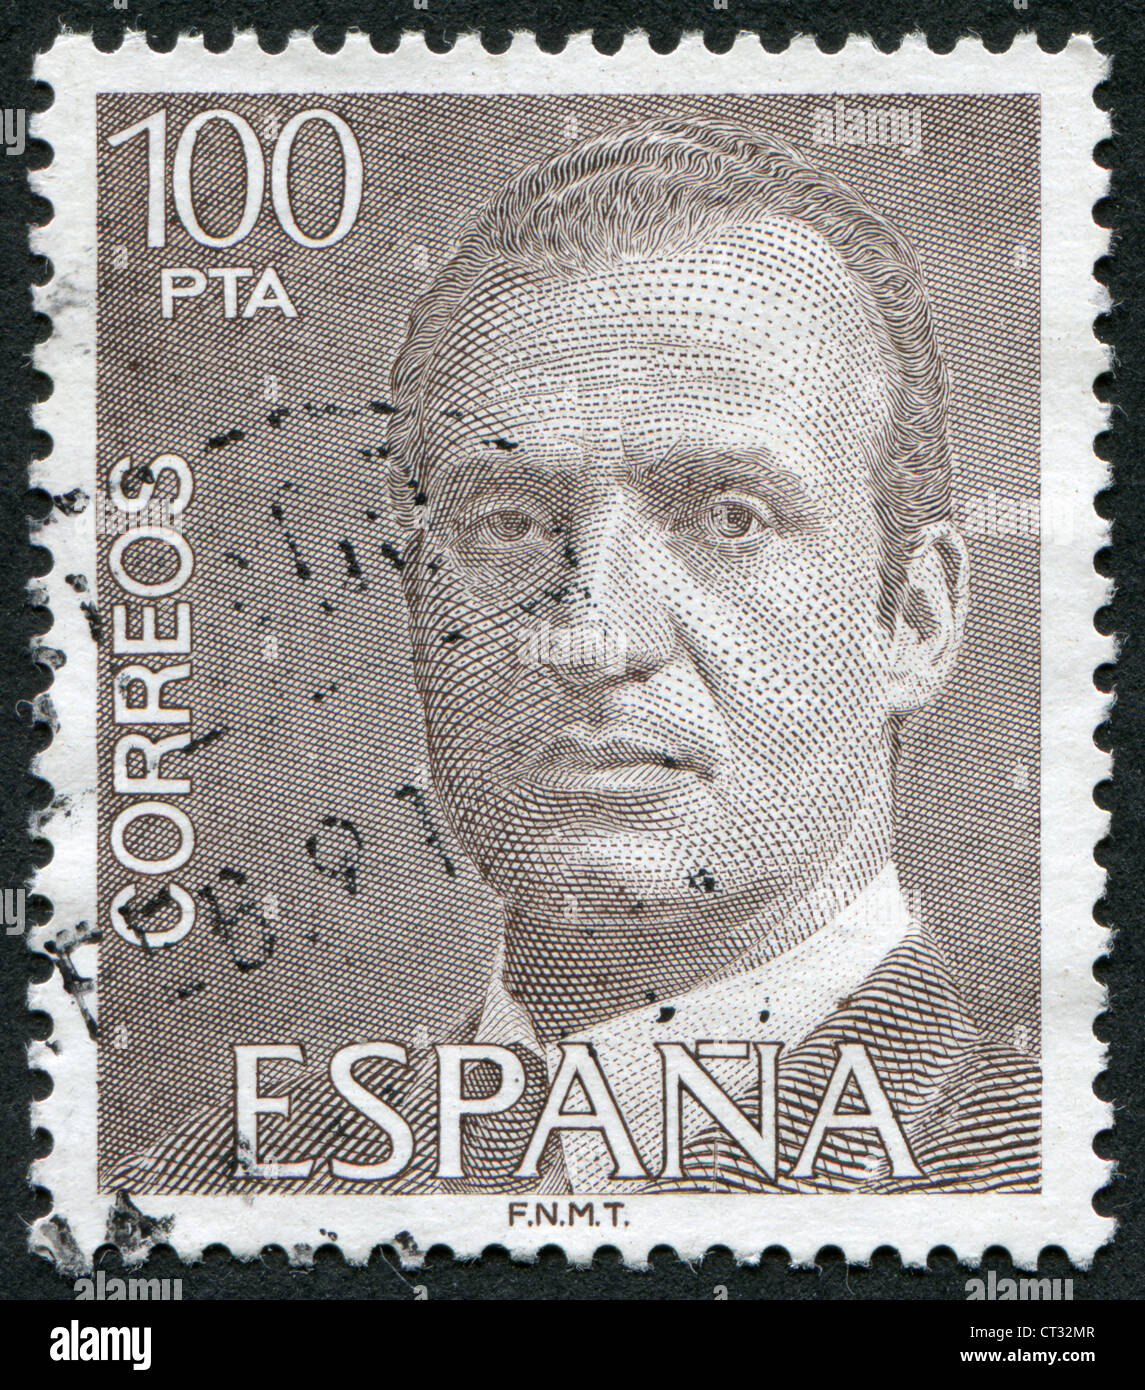 SPAIN-CIRCA 1981: A stamp printed in the Spain, shows the King of Spain Juan Carlos I, circa 1981 Stock Photo